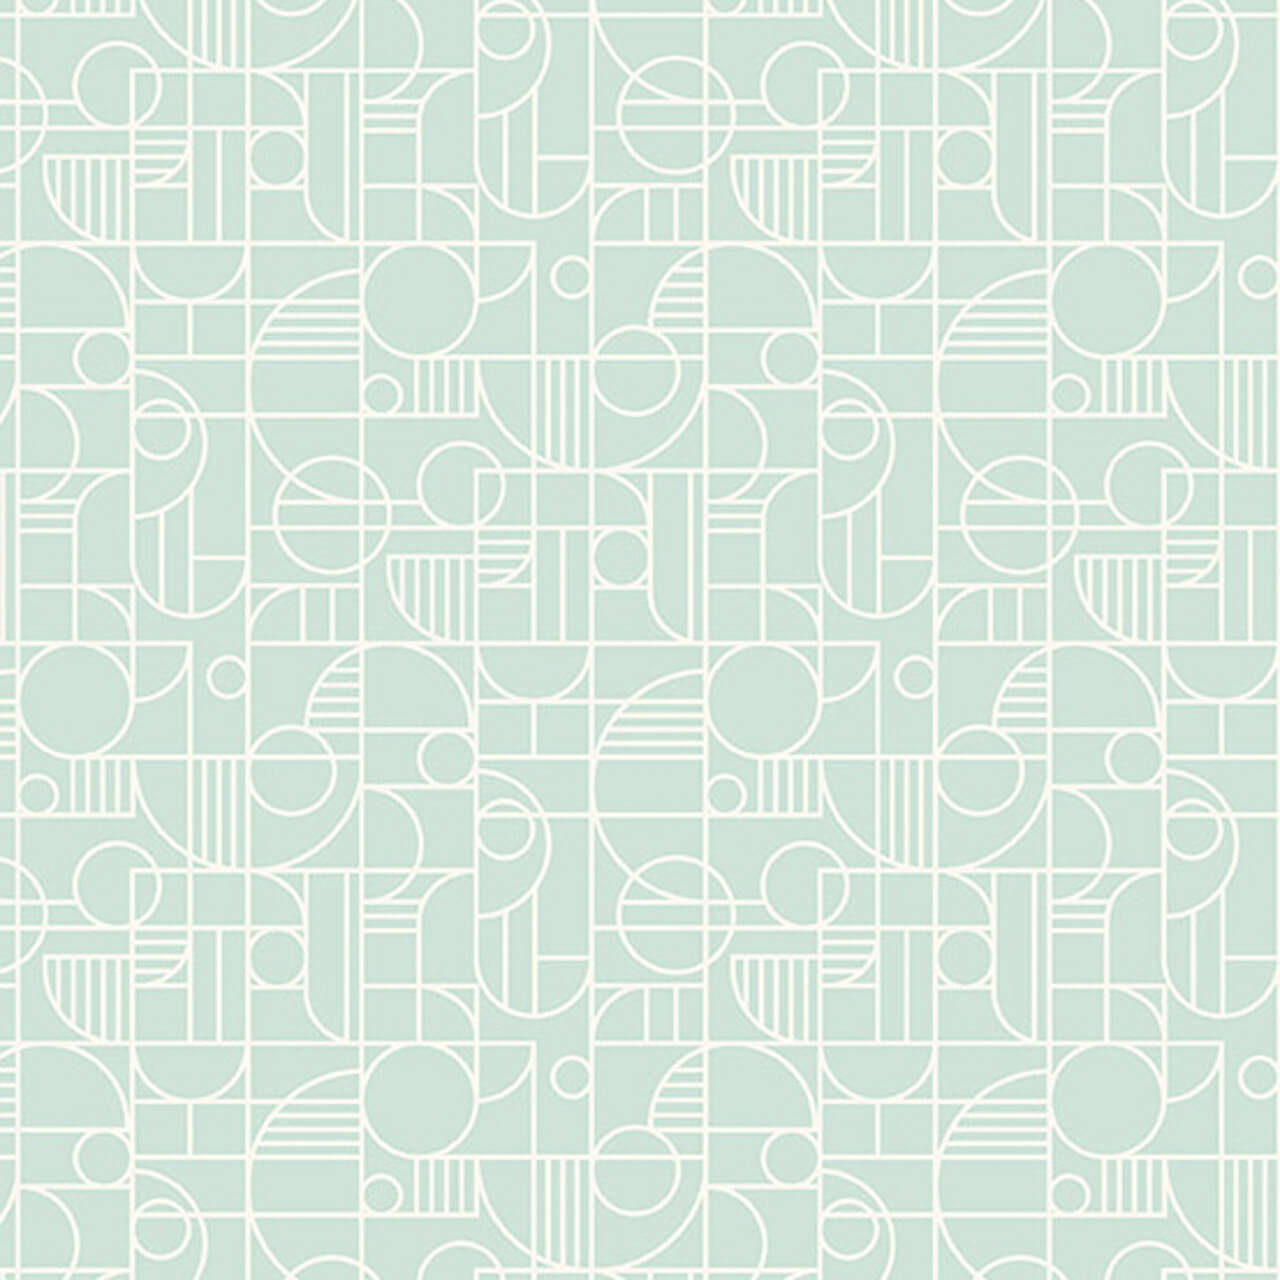 Crafting Calm: Sea Glass Gateway Fabric -  features a line-drawing grid of white circles and semi-circles against a pale turquoise background